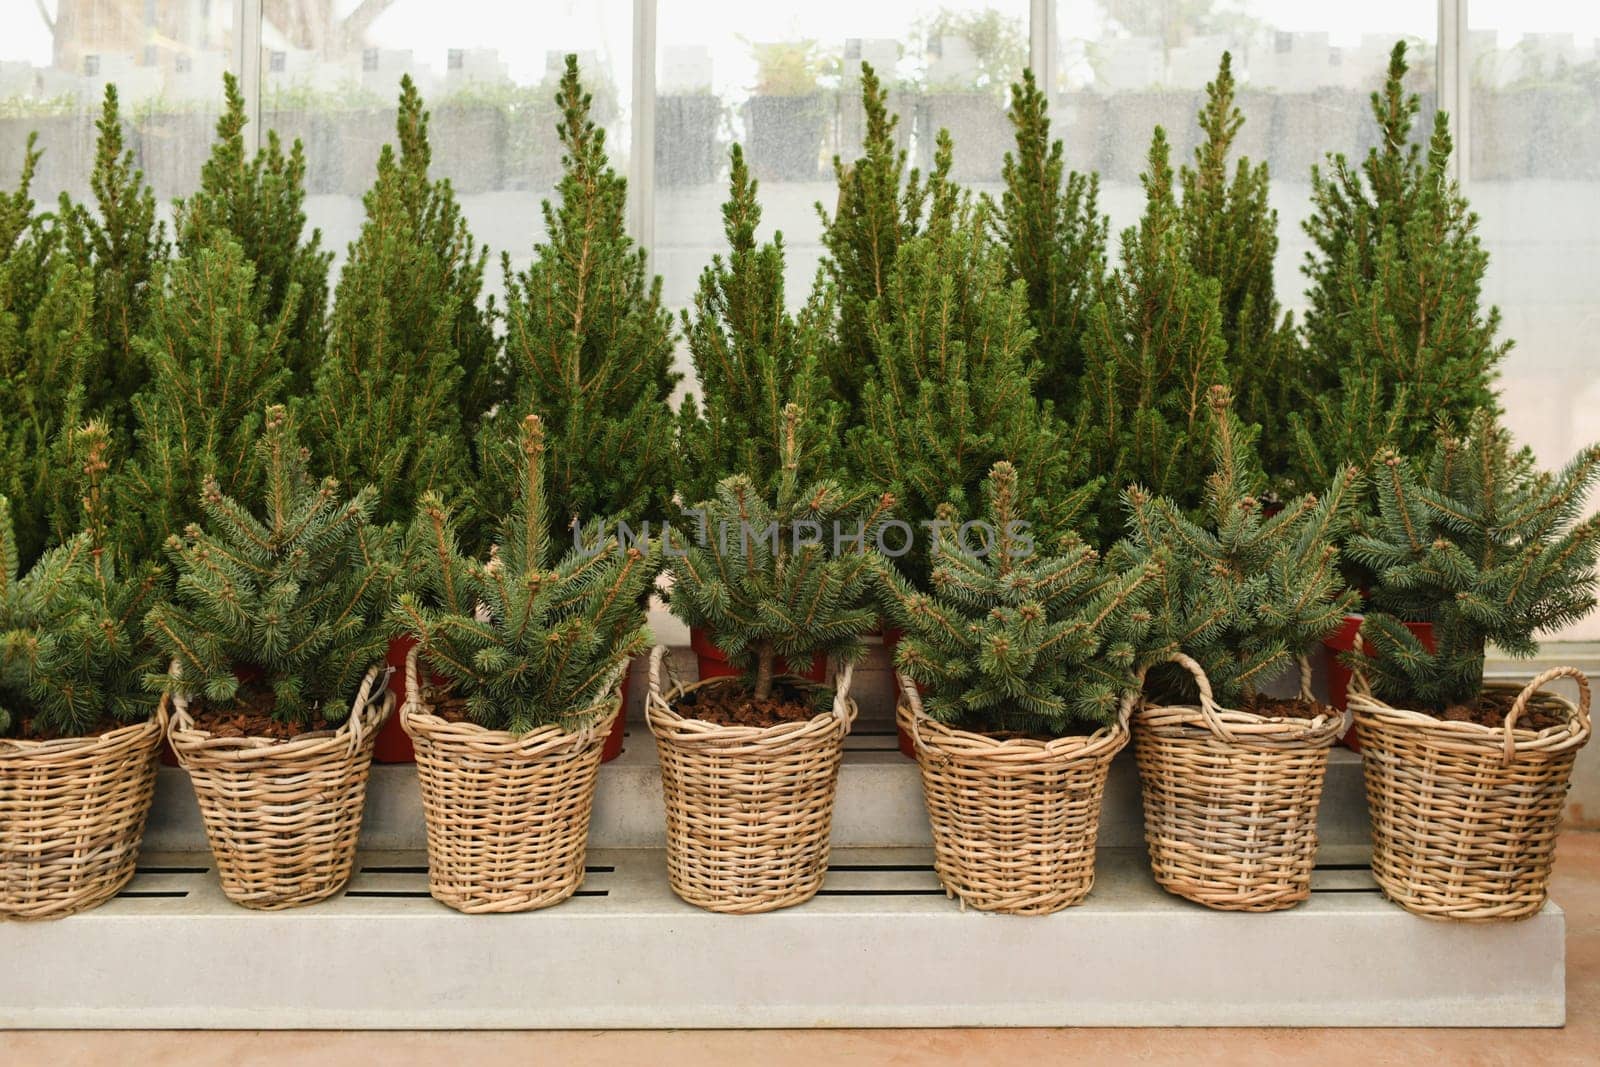 Christmas trees in a red pots for sale on a market for growing